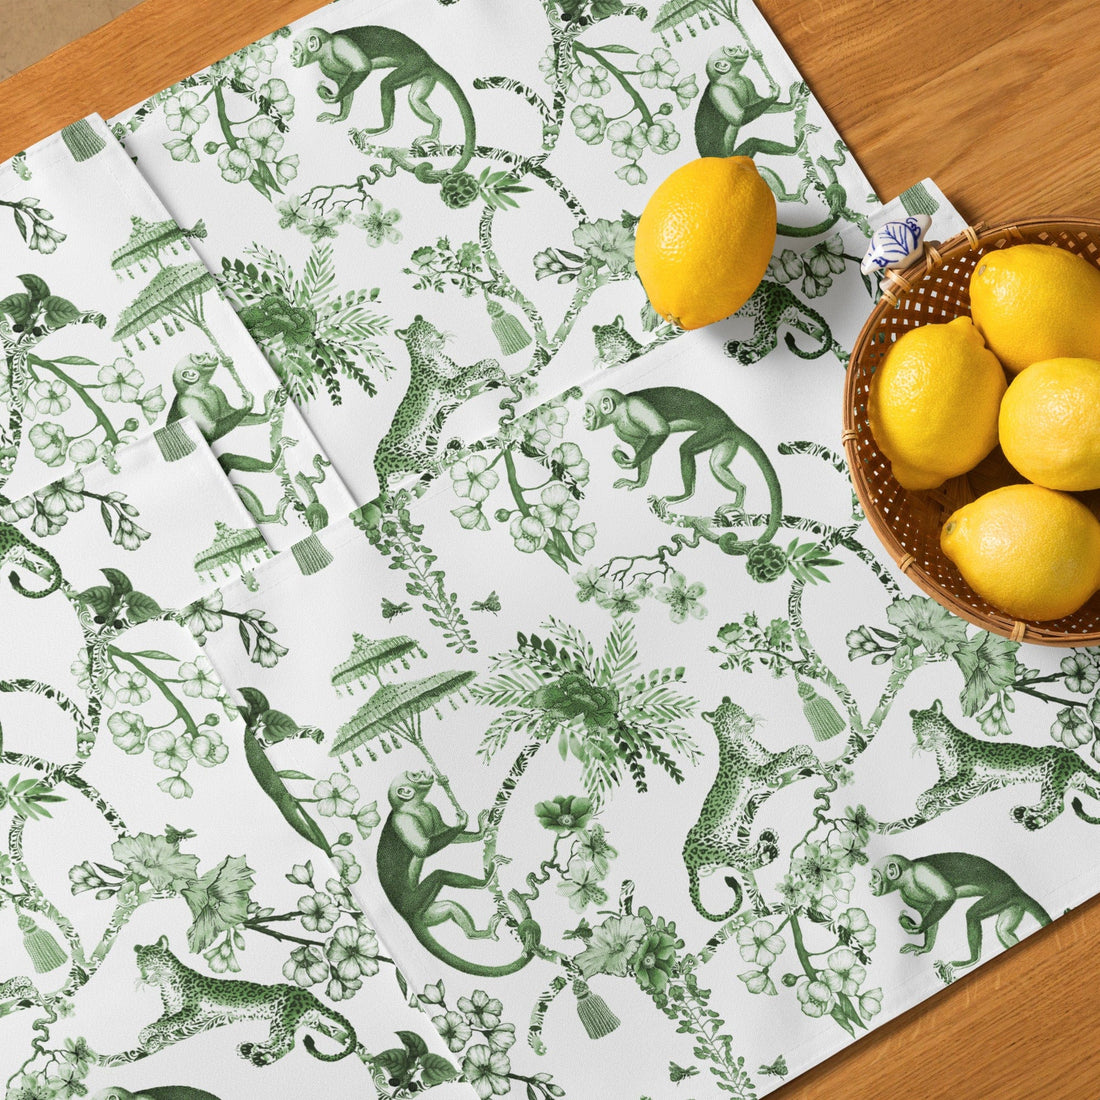 Kate McEnroe New York Set of 4 Chinoiserie Placemats, Floral Green, White Chinoiserie Jungle Table Linen, Country Farmhouse Botanical Toile Table Decor Placemats 8608700_17484